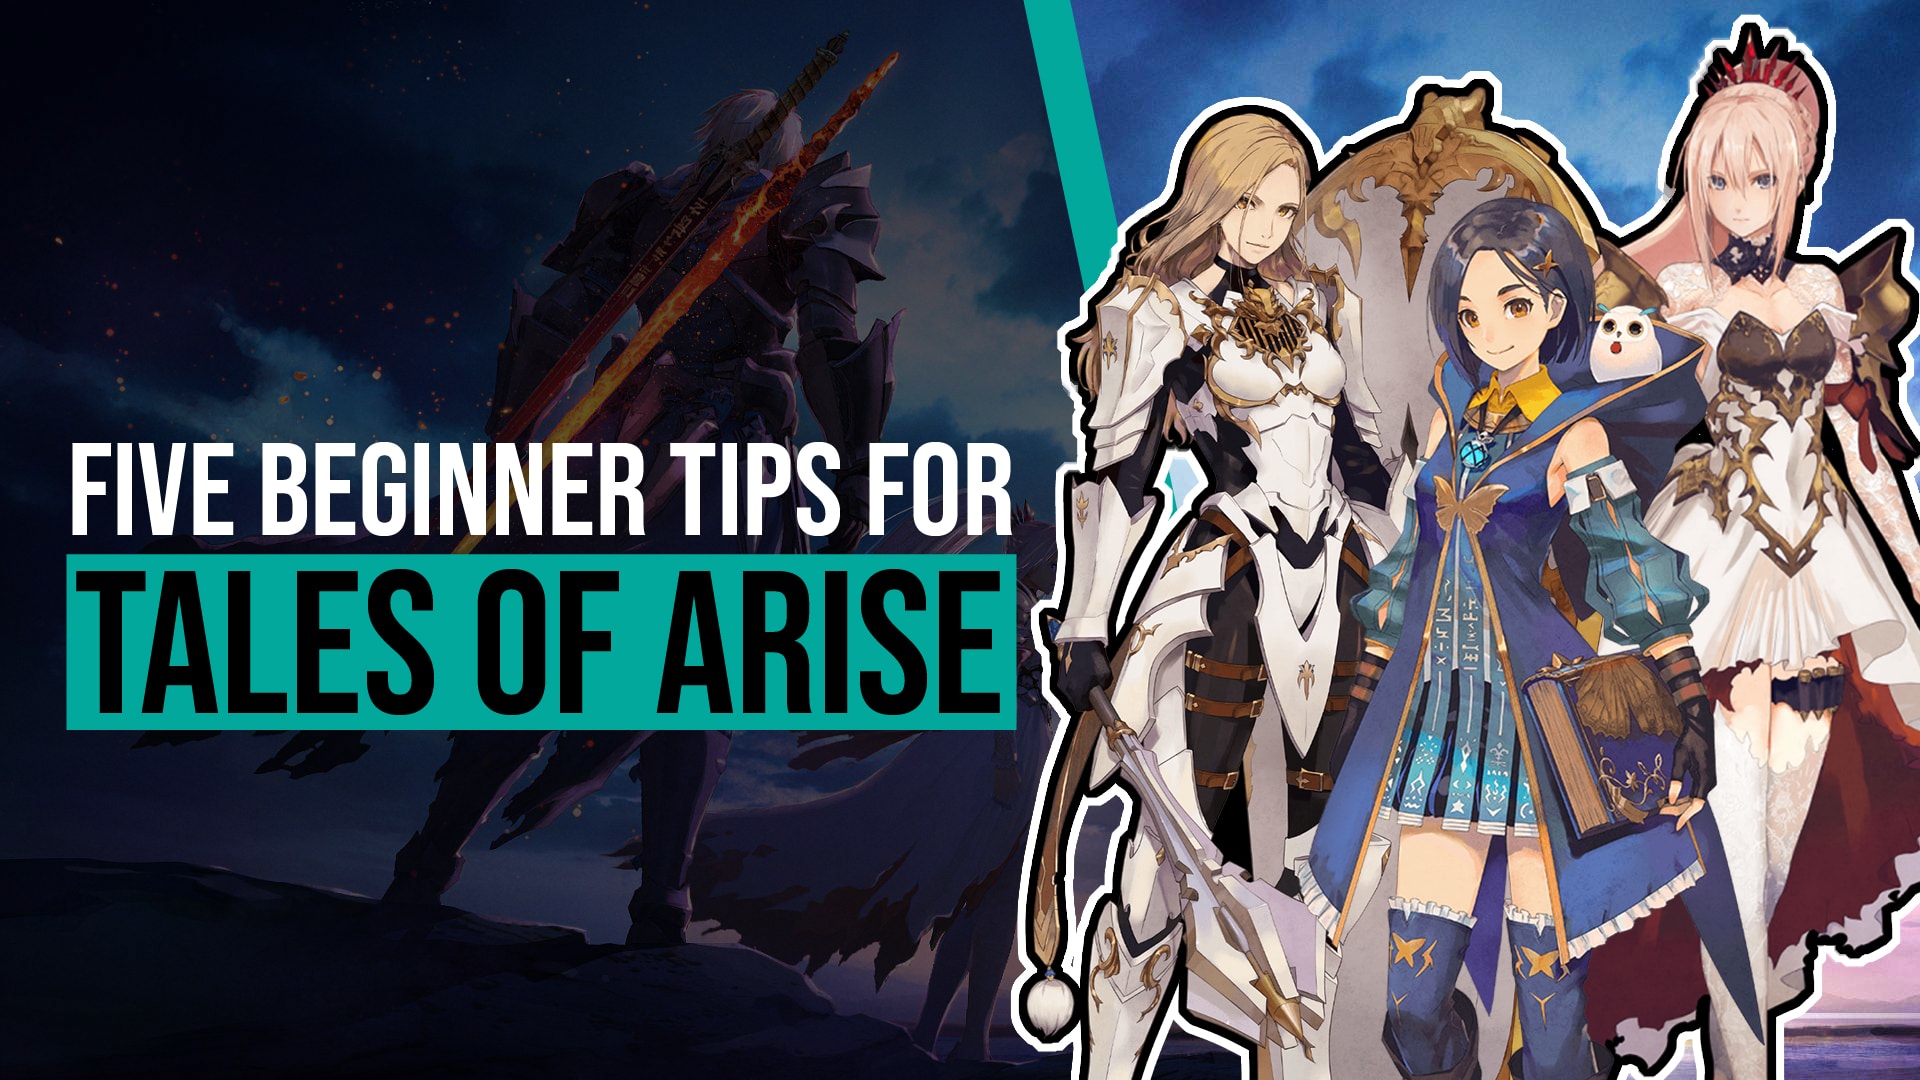 Five Beginner Tips for Tales of Arise